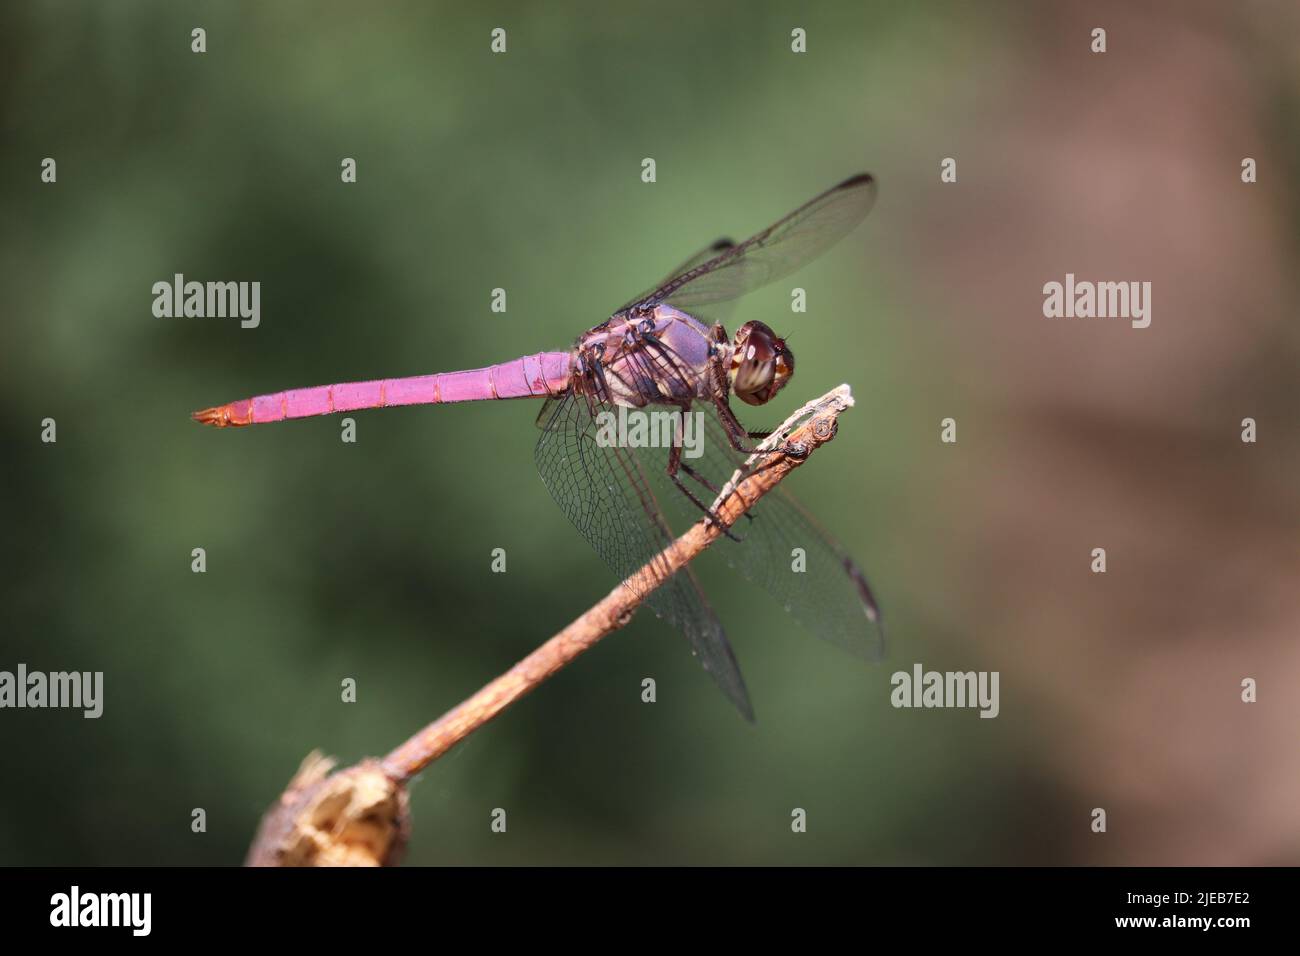 Male roseate skimmer or Orthemis ferruginea perching on stick at the Riparian water ranch in Arizona. Stock Photo